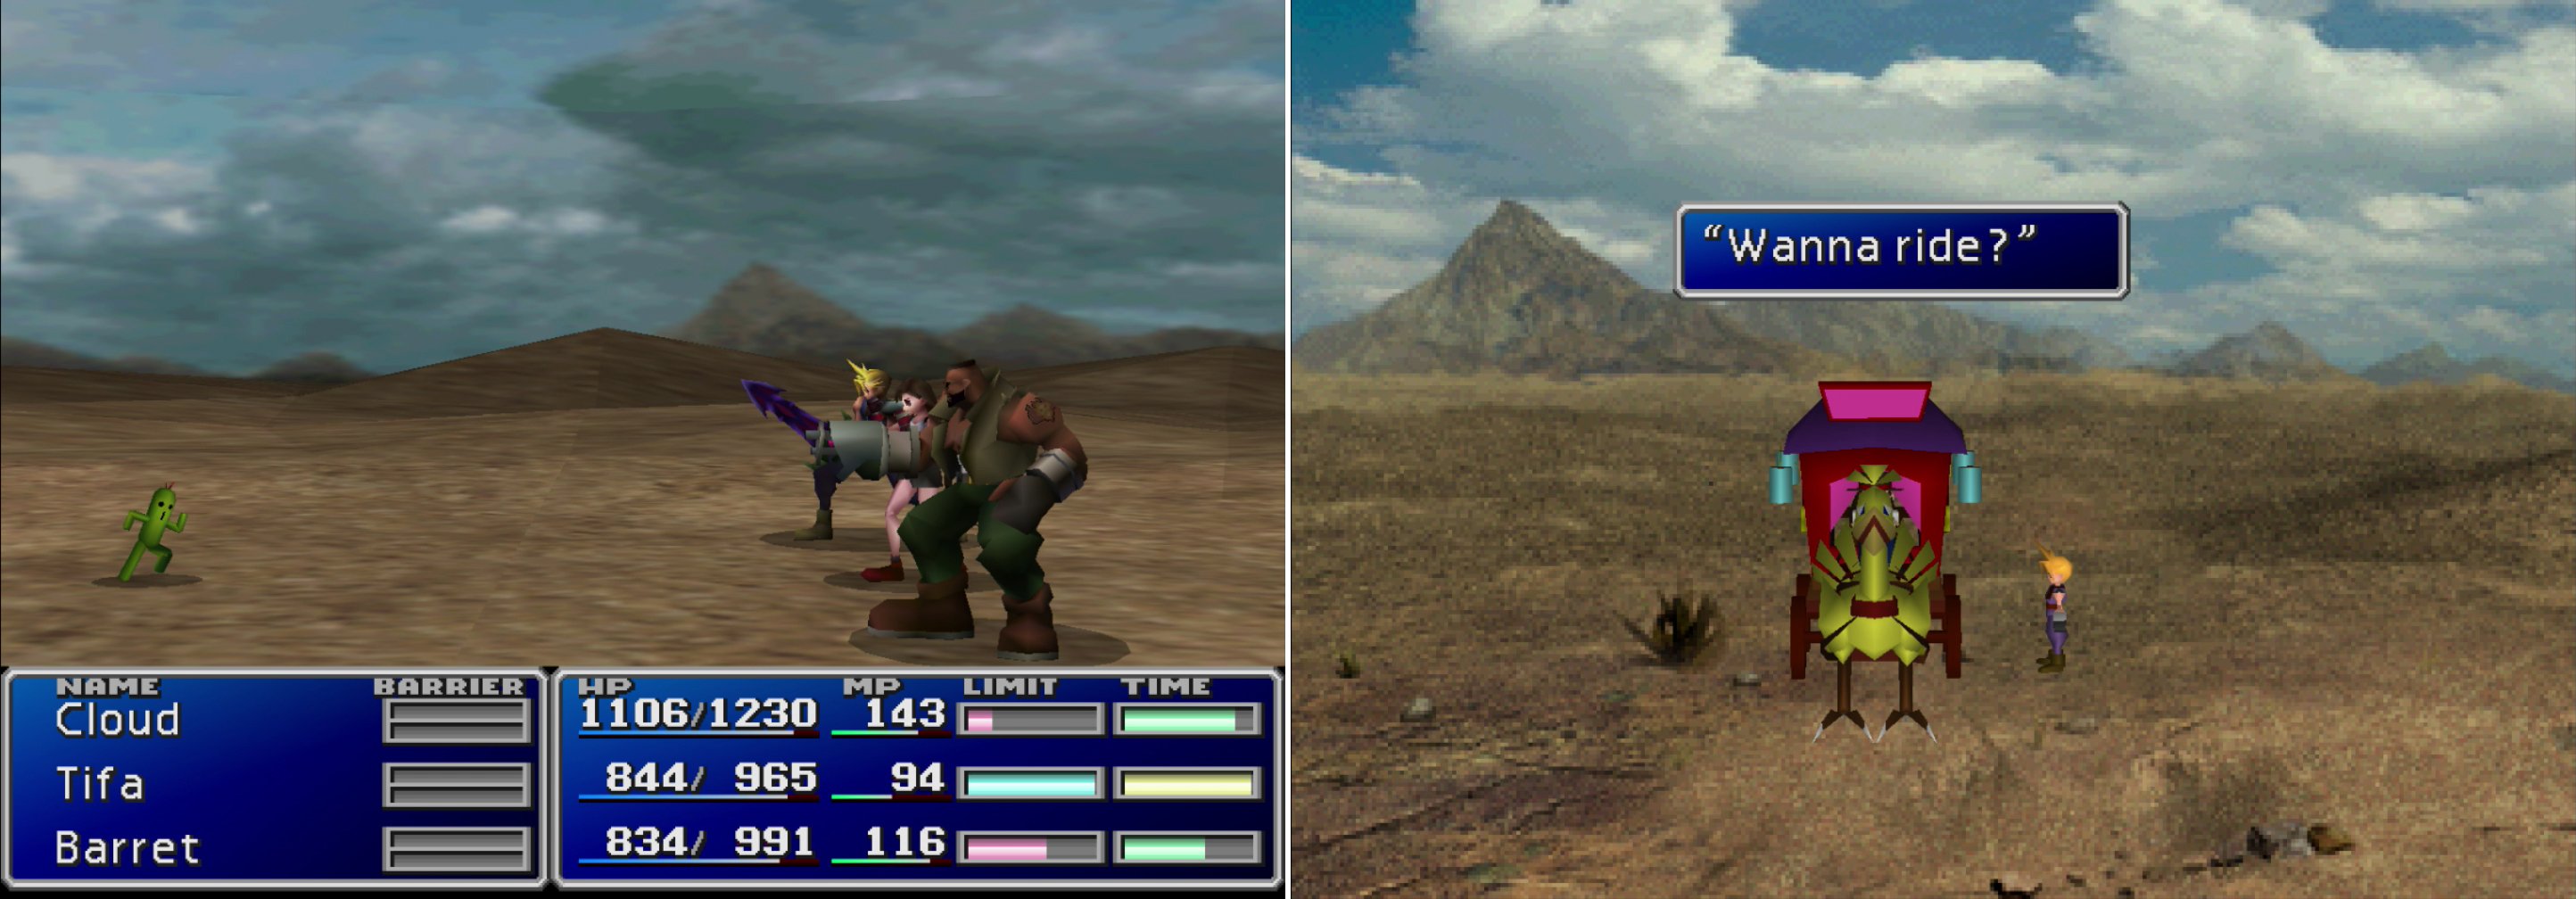 If you brave the deserts and are fortunate enough to encounter a Cactuar, killing one will earn you 10,000 Gil (left). If you get lost in the desert, keep exploring until you find the mysterious Chocobo carriage (right). It'll take you back to Corel Prison.